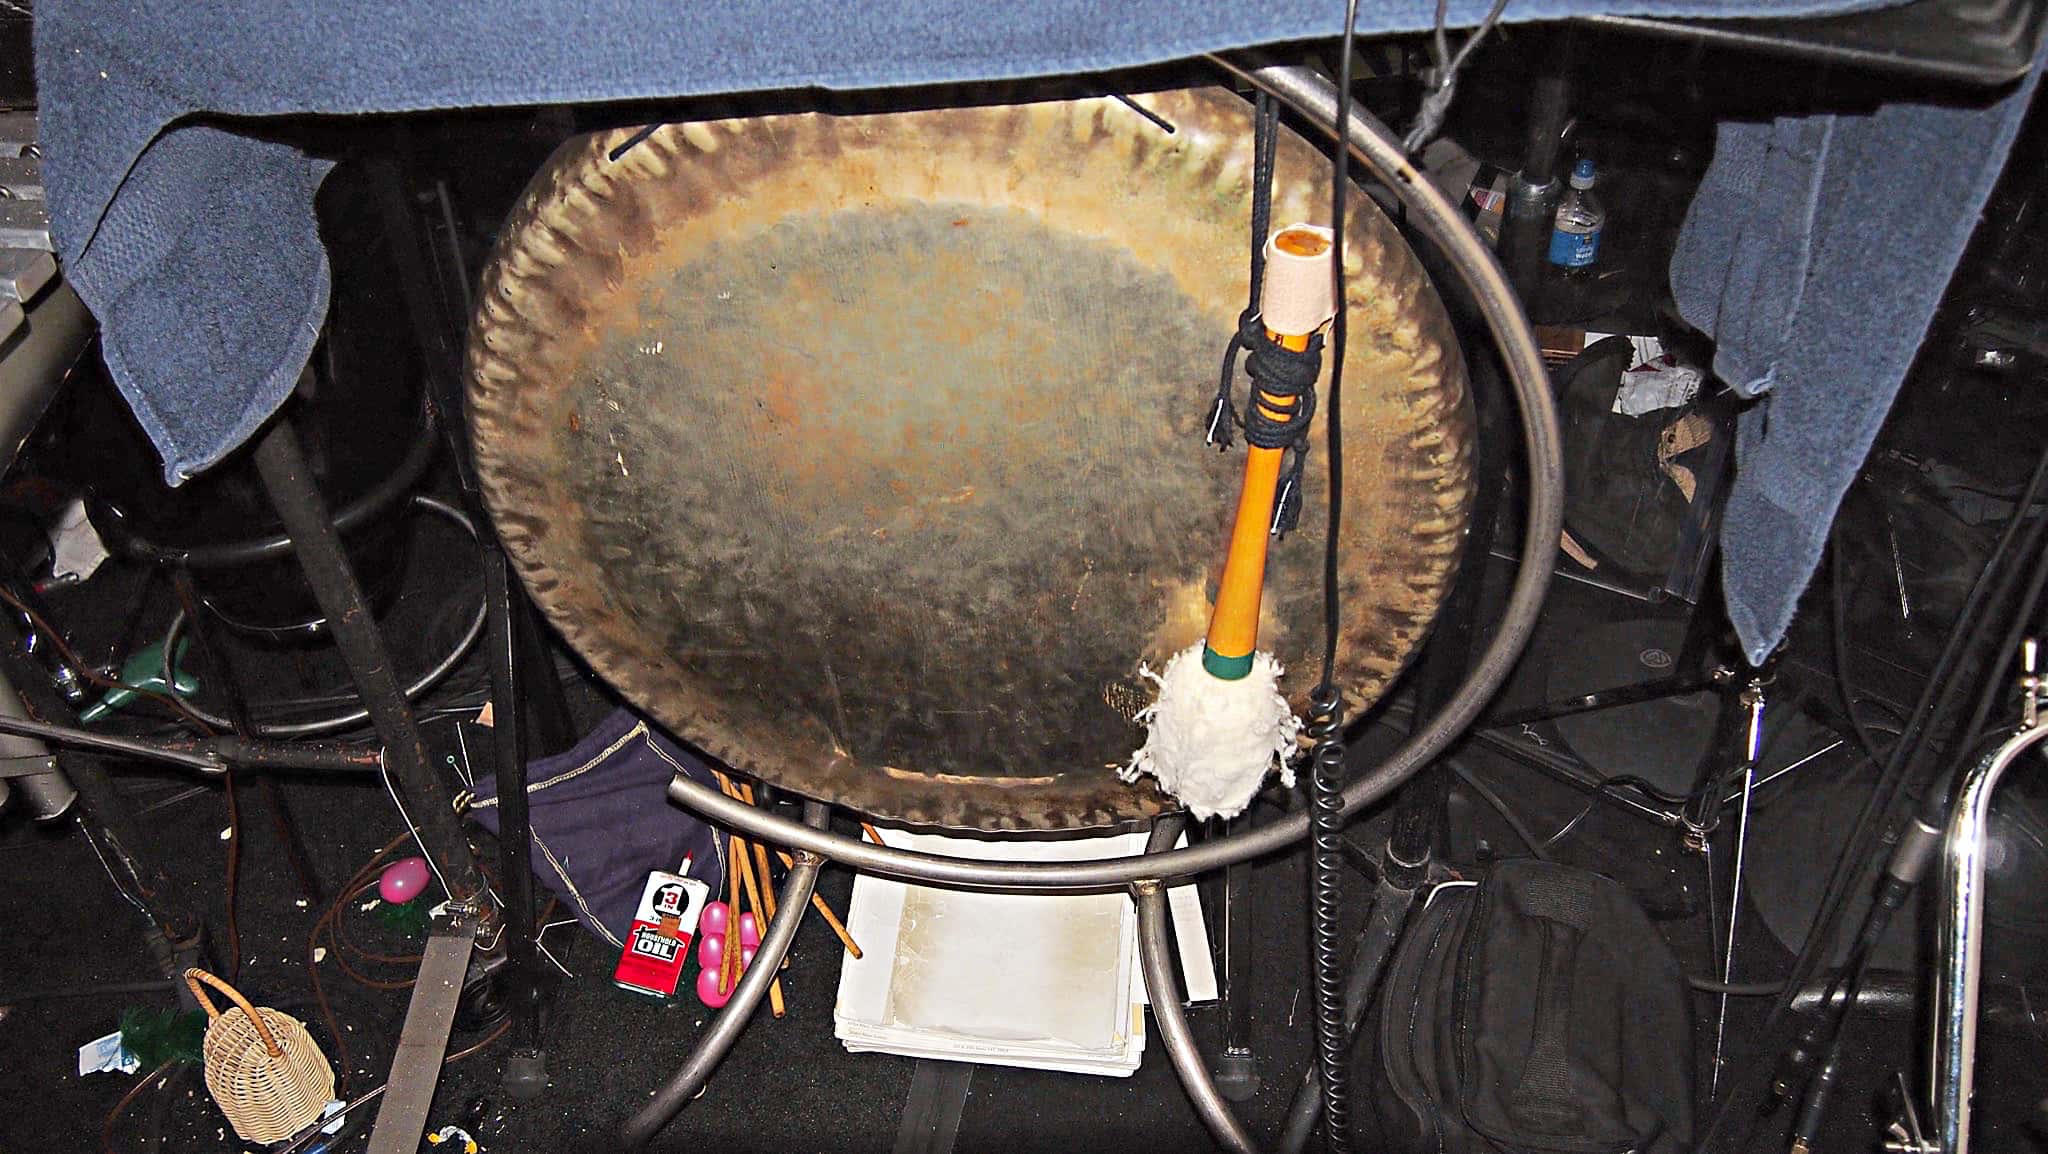 Paul Hansen’s percussion setup for the National Tour of Wicked at the Paramount Theater in Seattle, Washington.